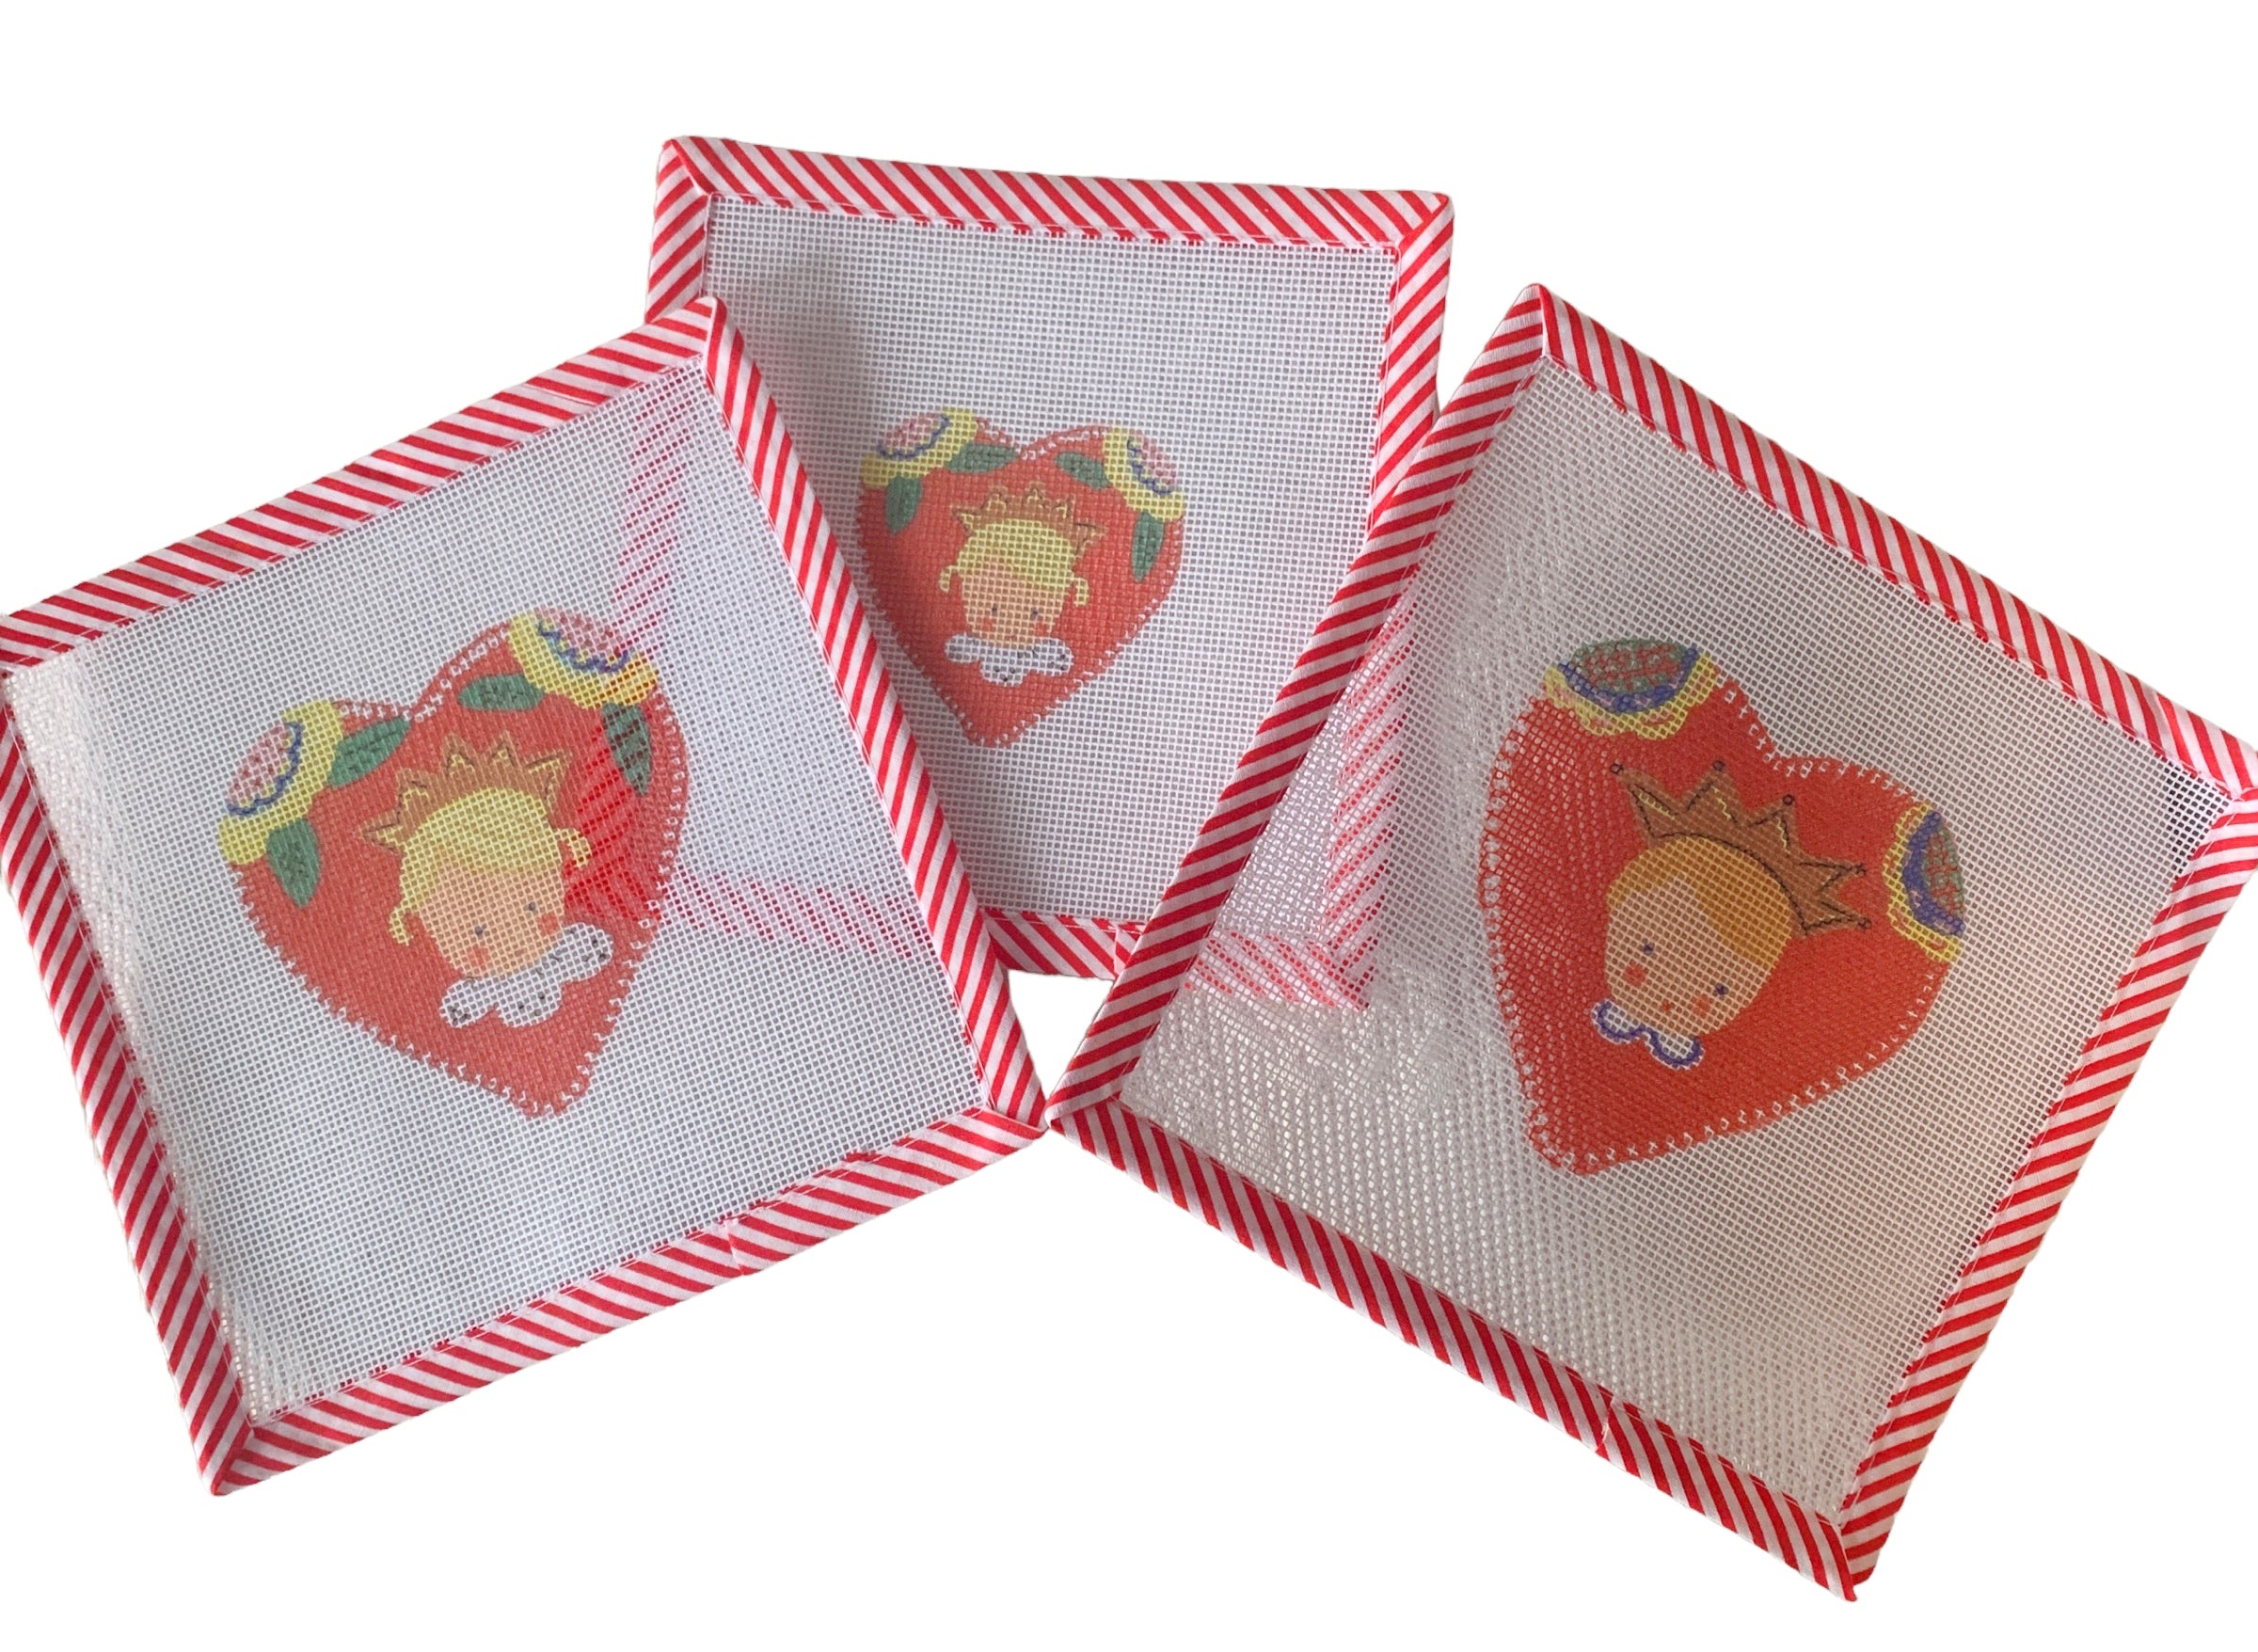 Needlepoint Heart - Premium  from Tricia Lowenfield Design 